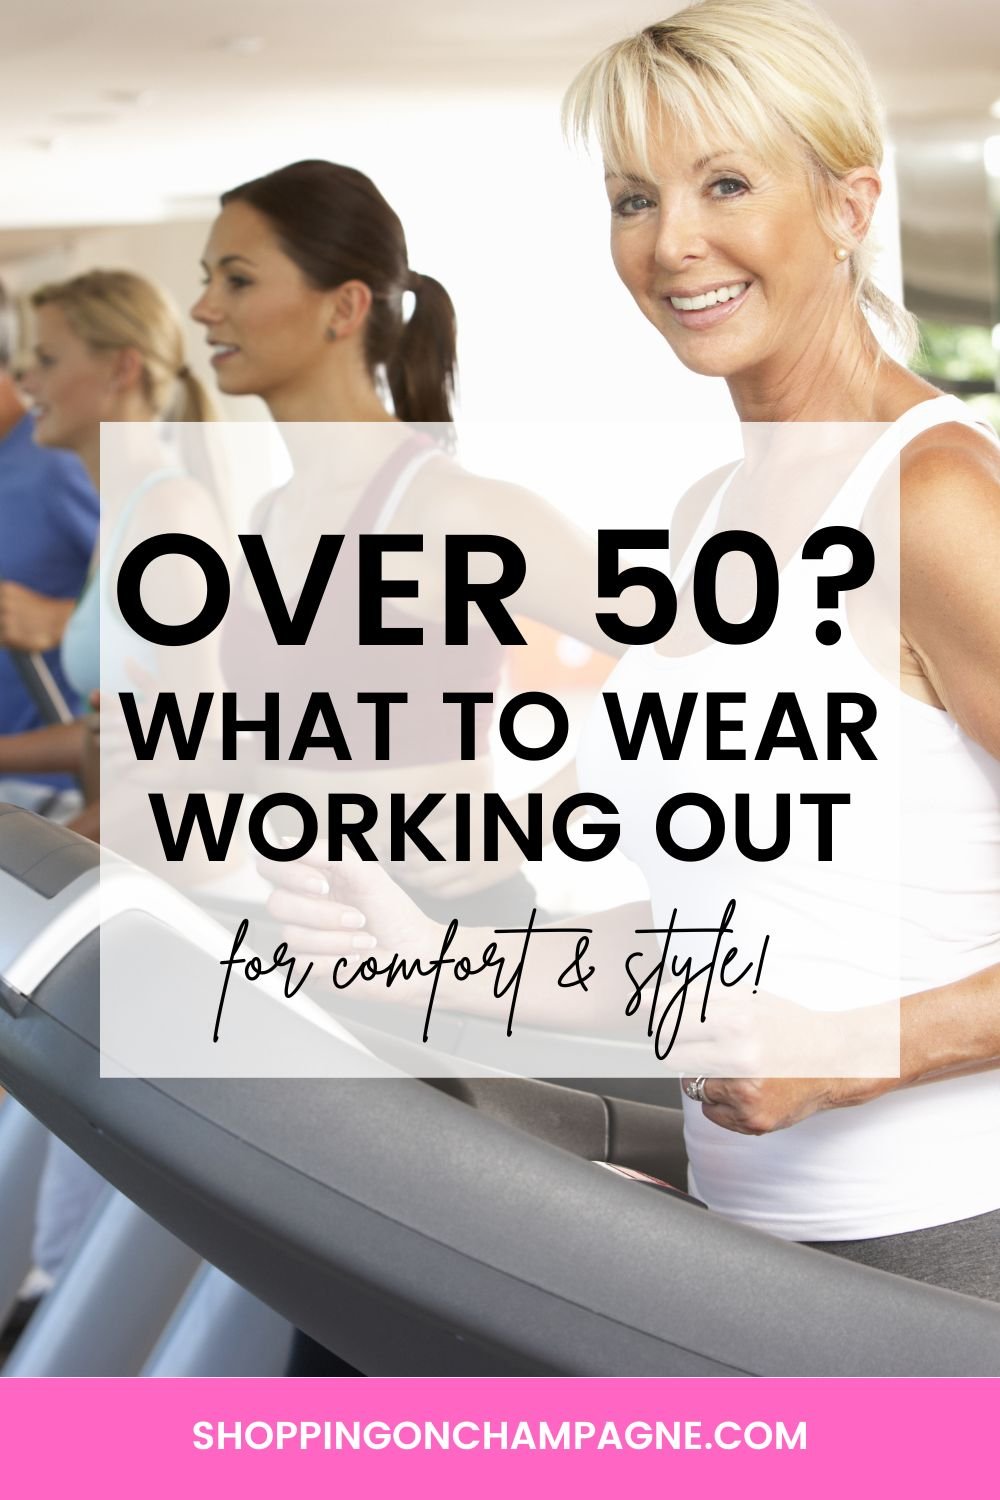 Over 50? What to Wear for a Perfect Workout! — Shopping on Champagne, Nancy Queen